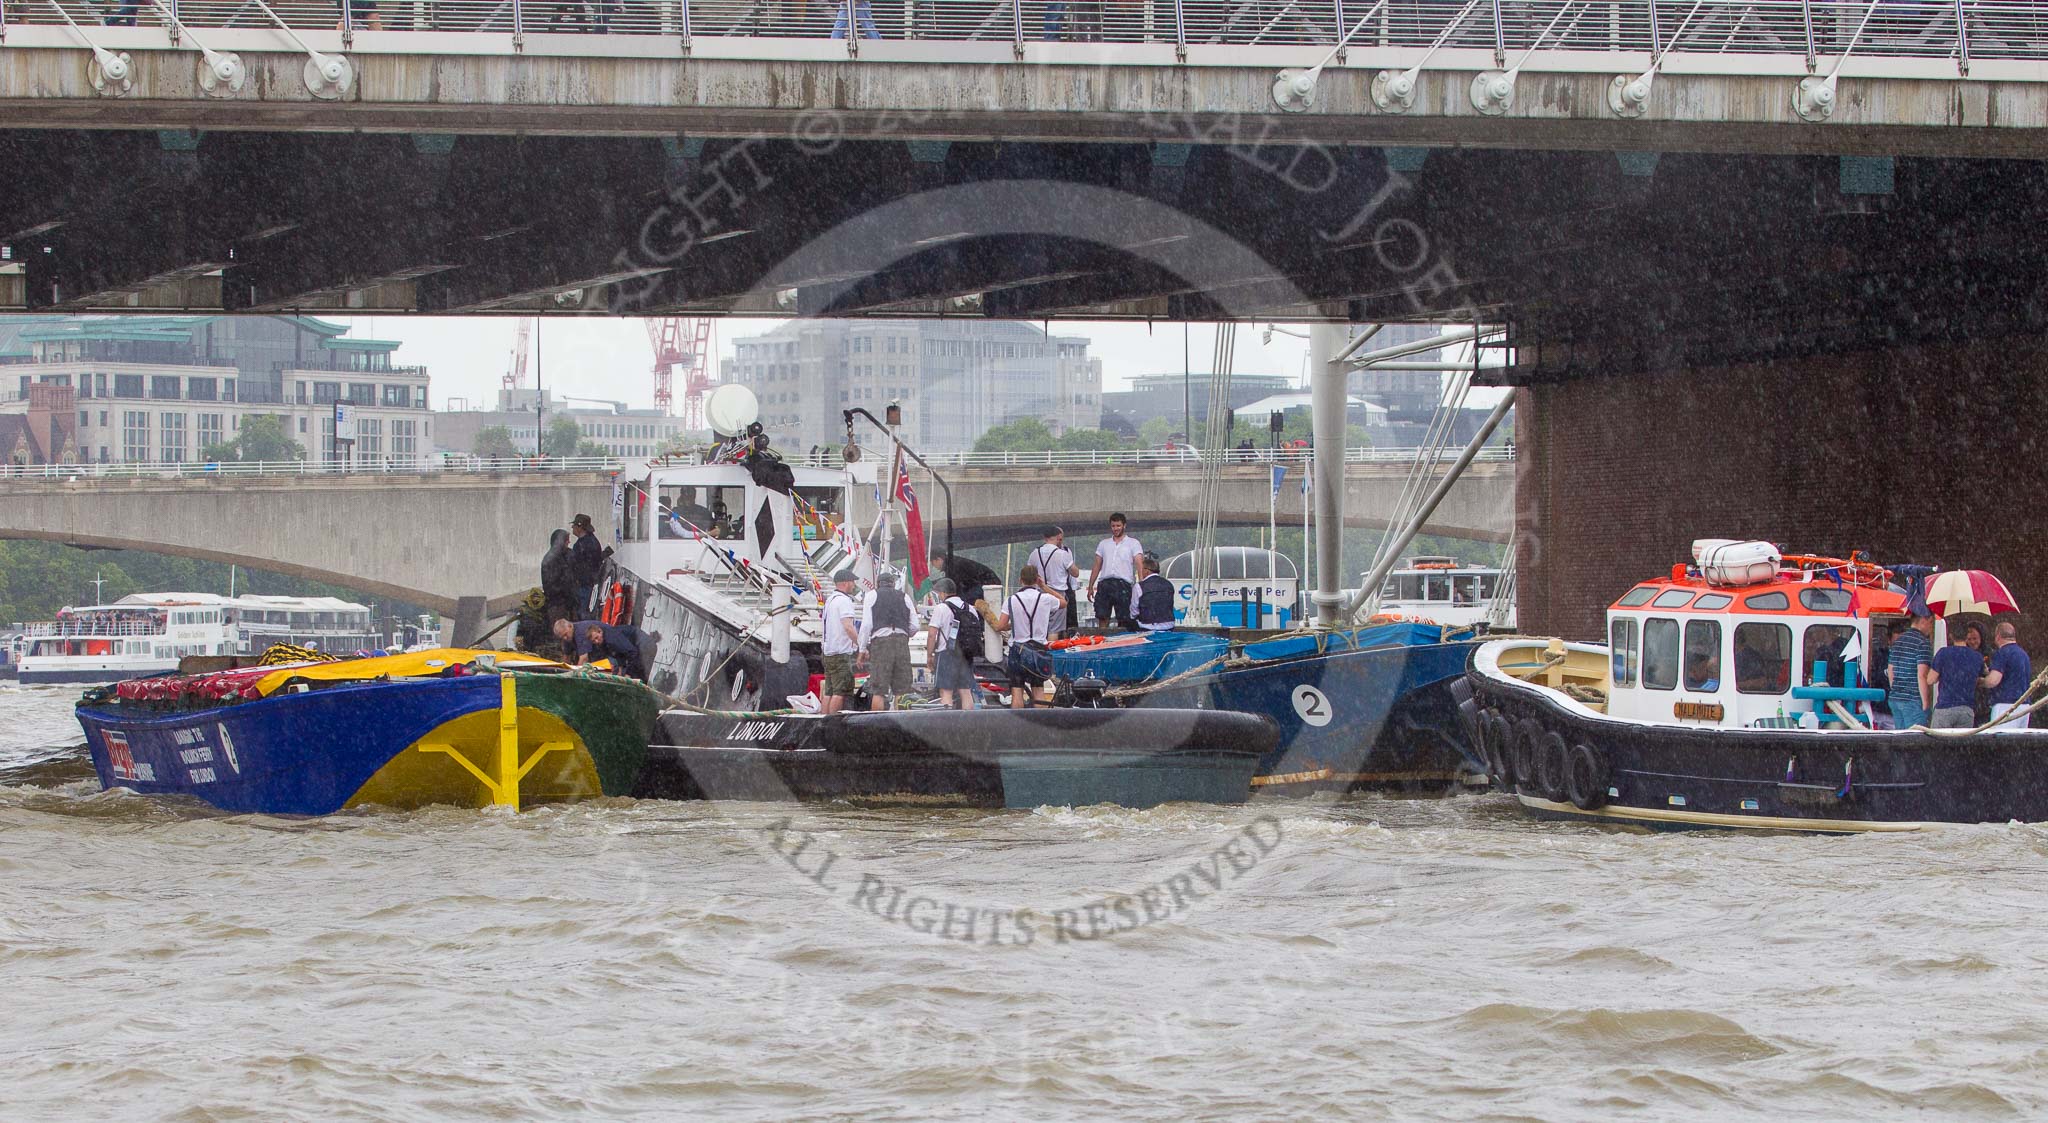 TOW River Thames Barge Driving Race 2014.
River Thames between Greenwich and Westminster,
London,

United Kingdom,
on 28 June 2014 at 14:48, image #451